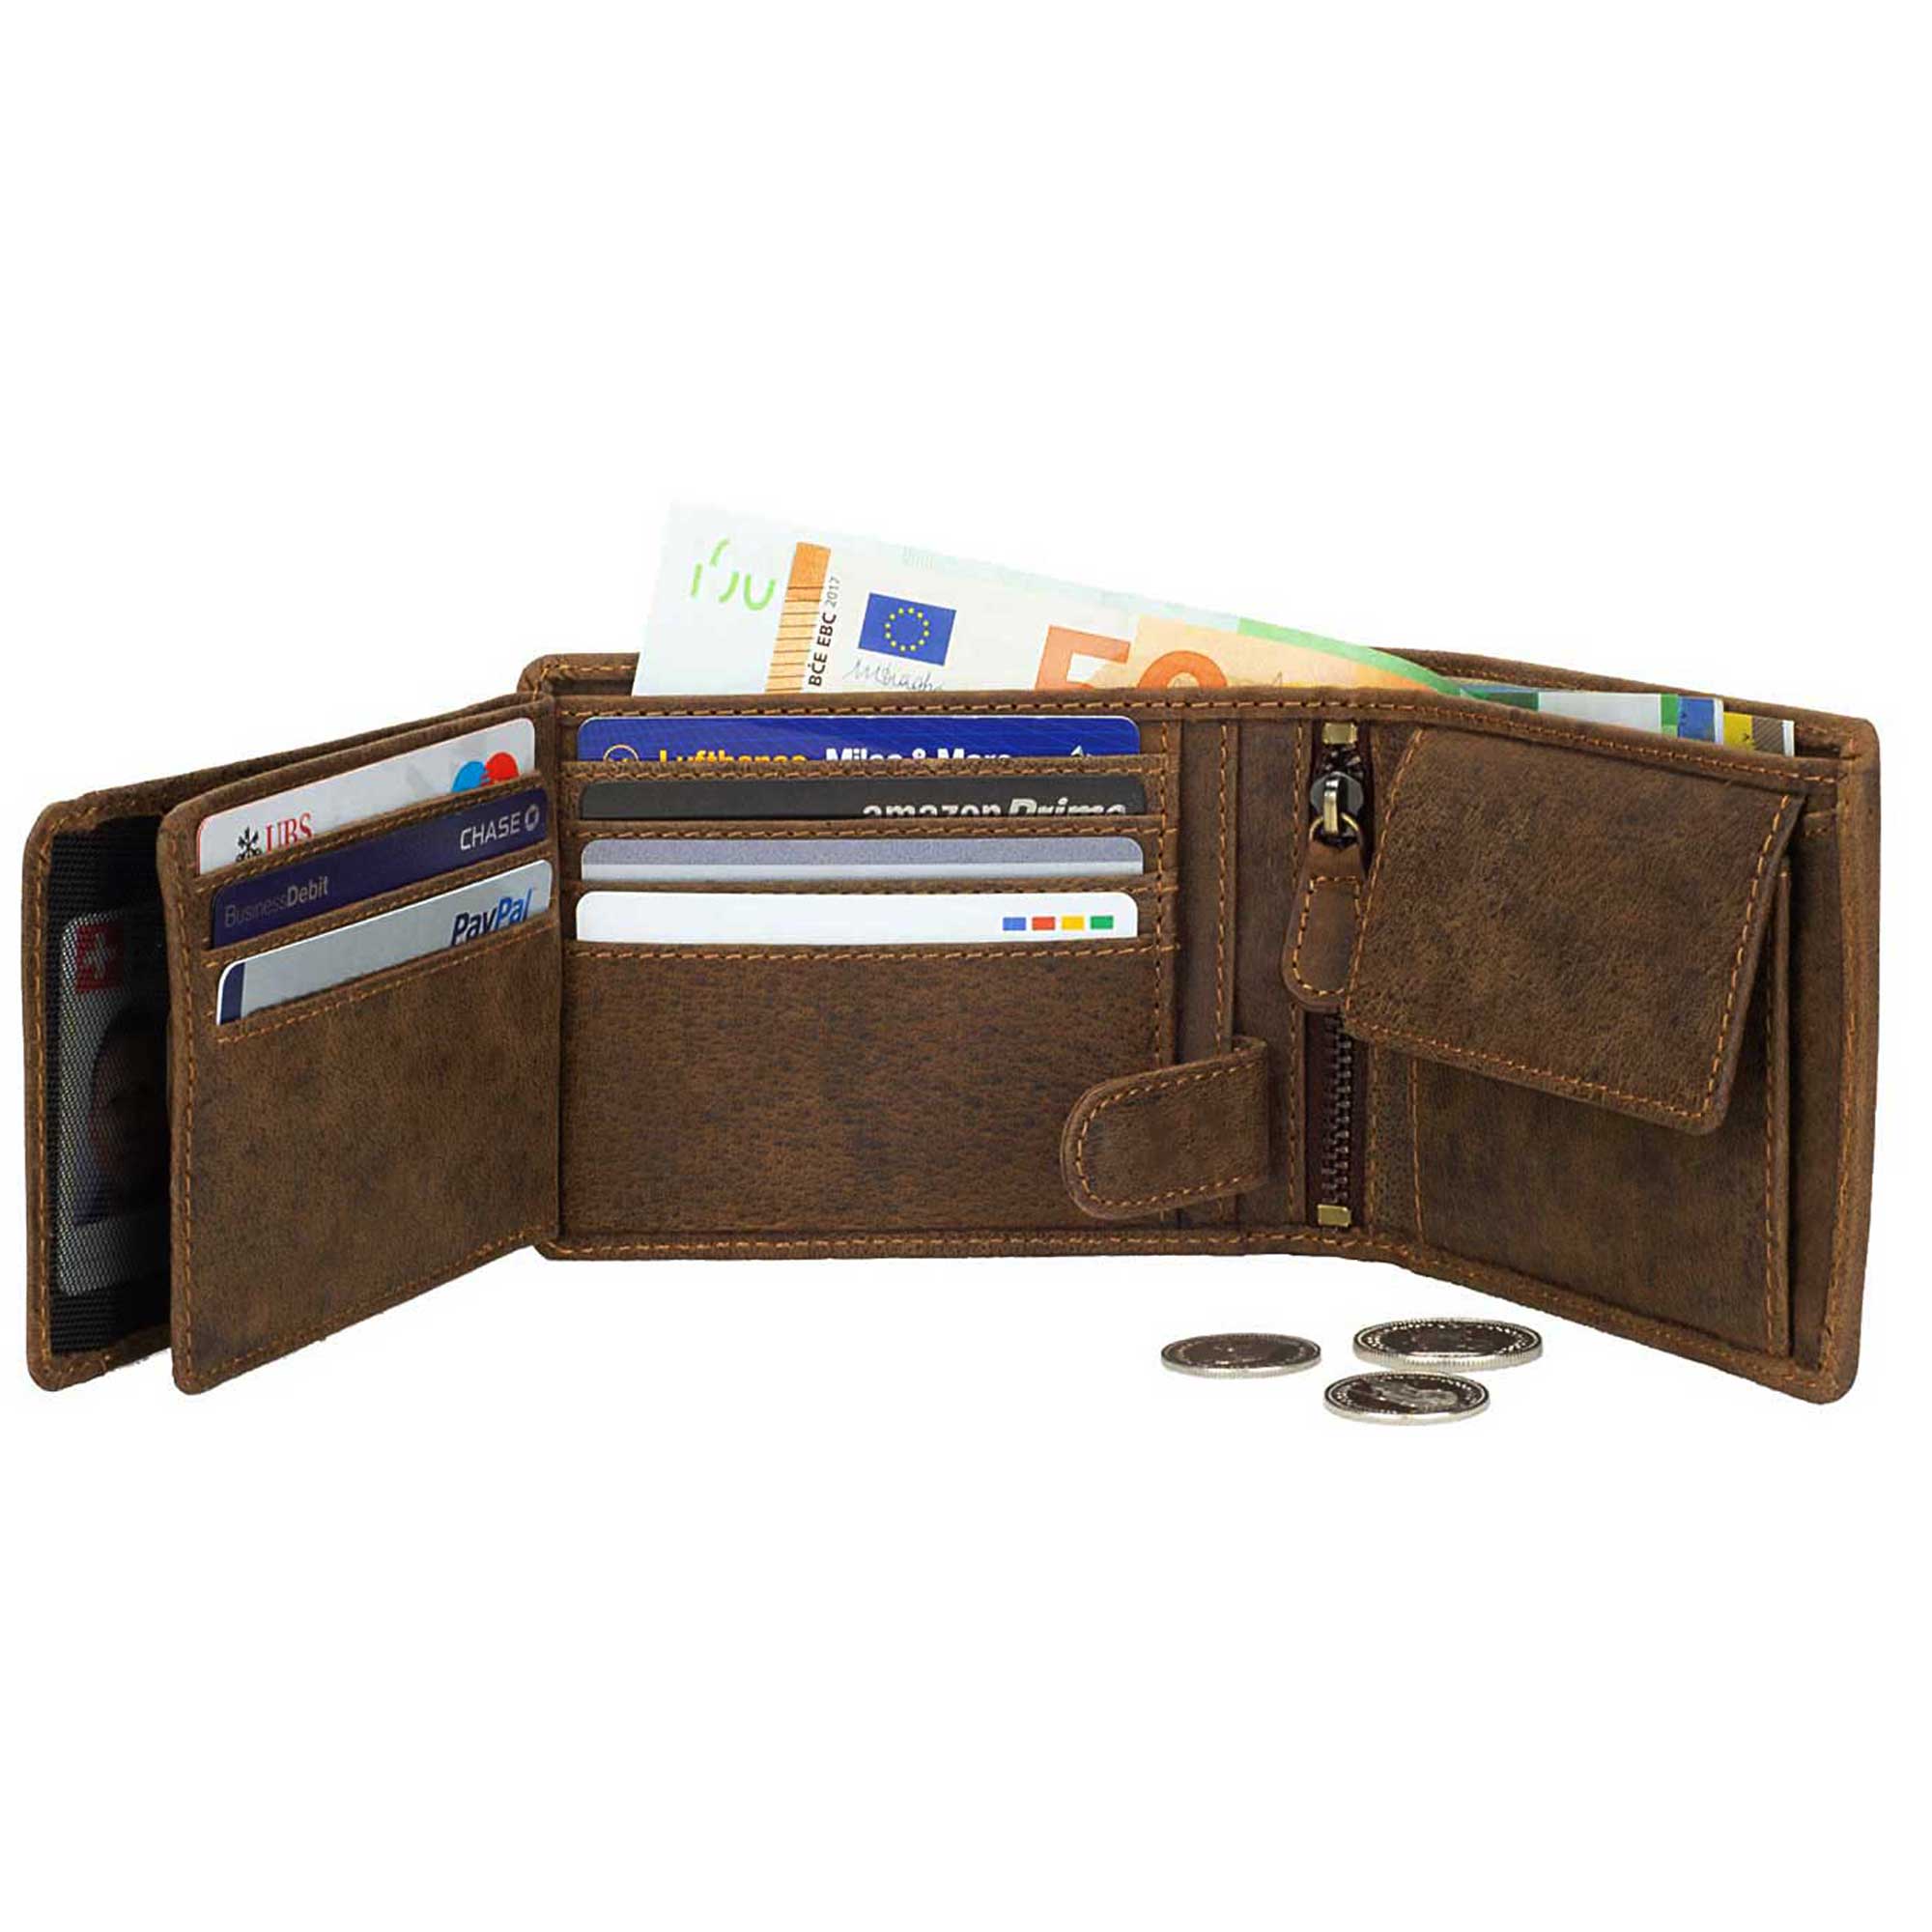 DiLoro Men's Leather Bifold Flip ID Zip Coin Wallet with RFID Protection - Fully Open Dark Hunter Brown